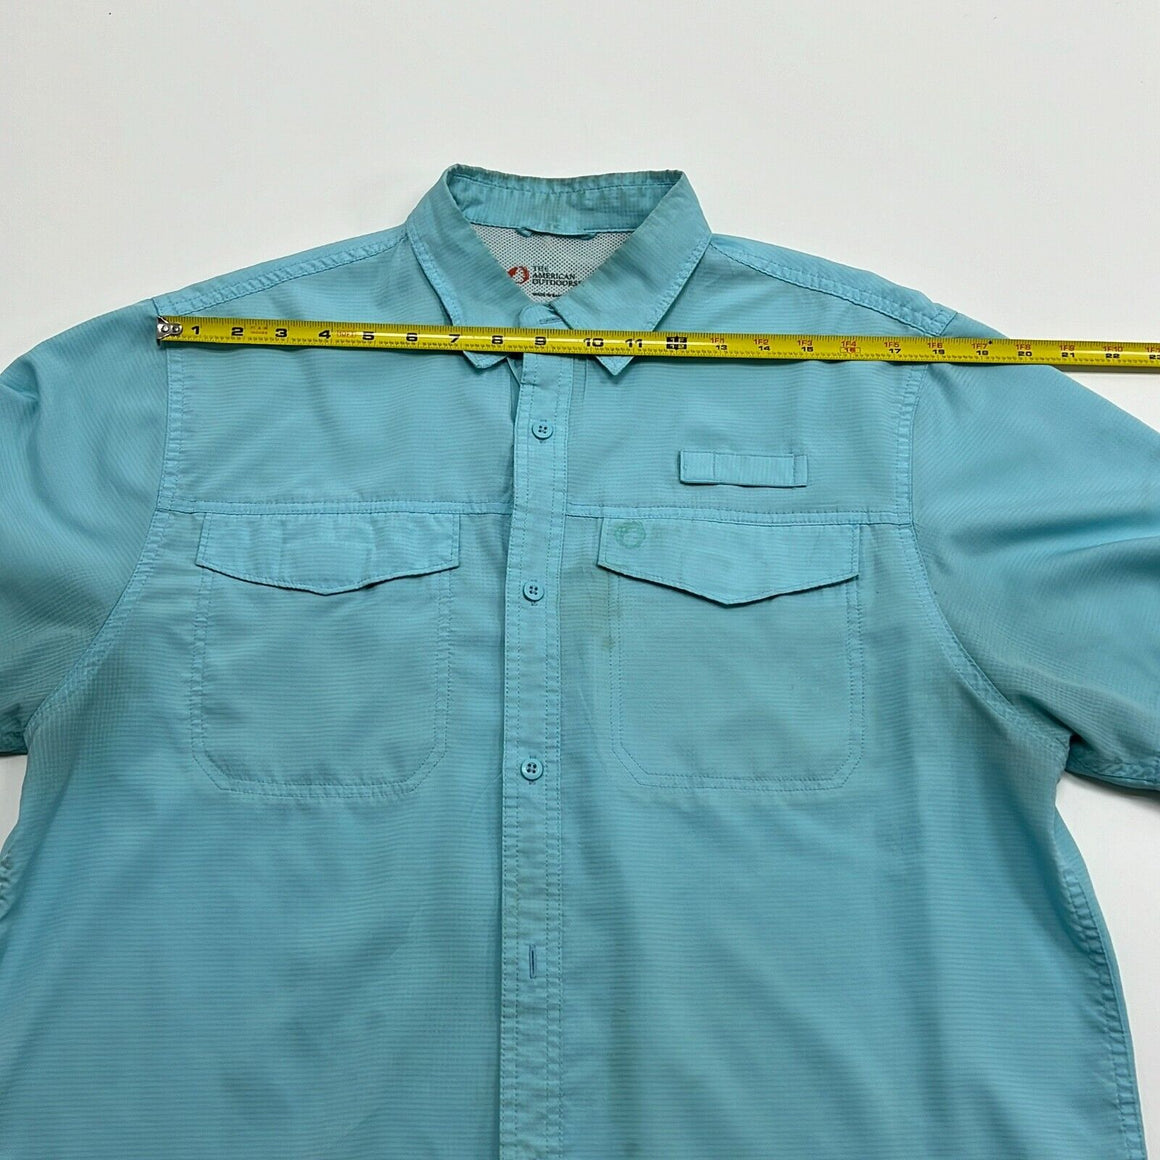 The American Outdoorsman Men's Blue Chest Pocket Fishing Button-Up Shirt  Size L